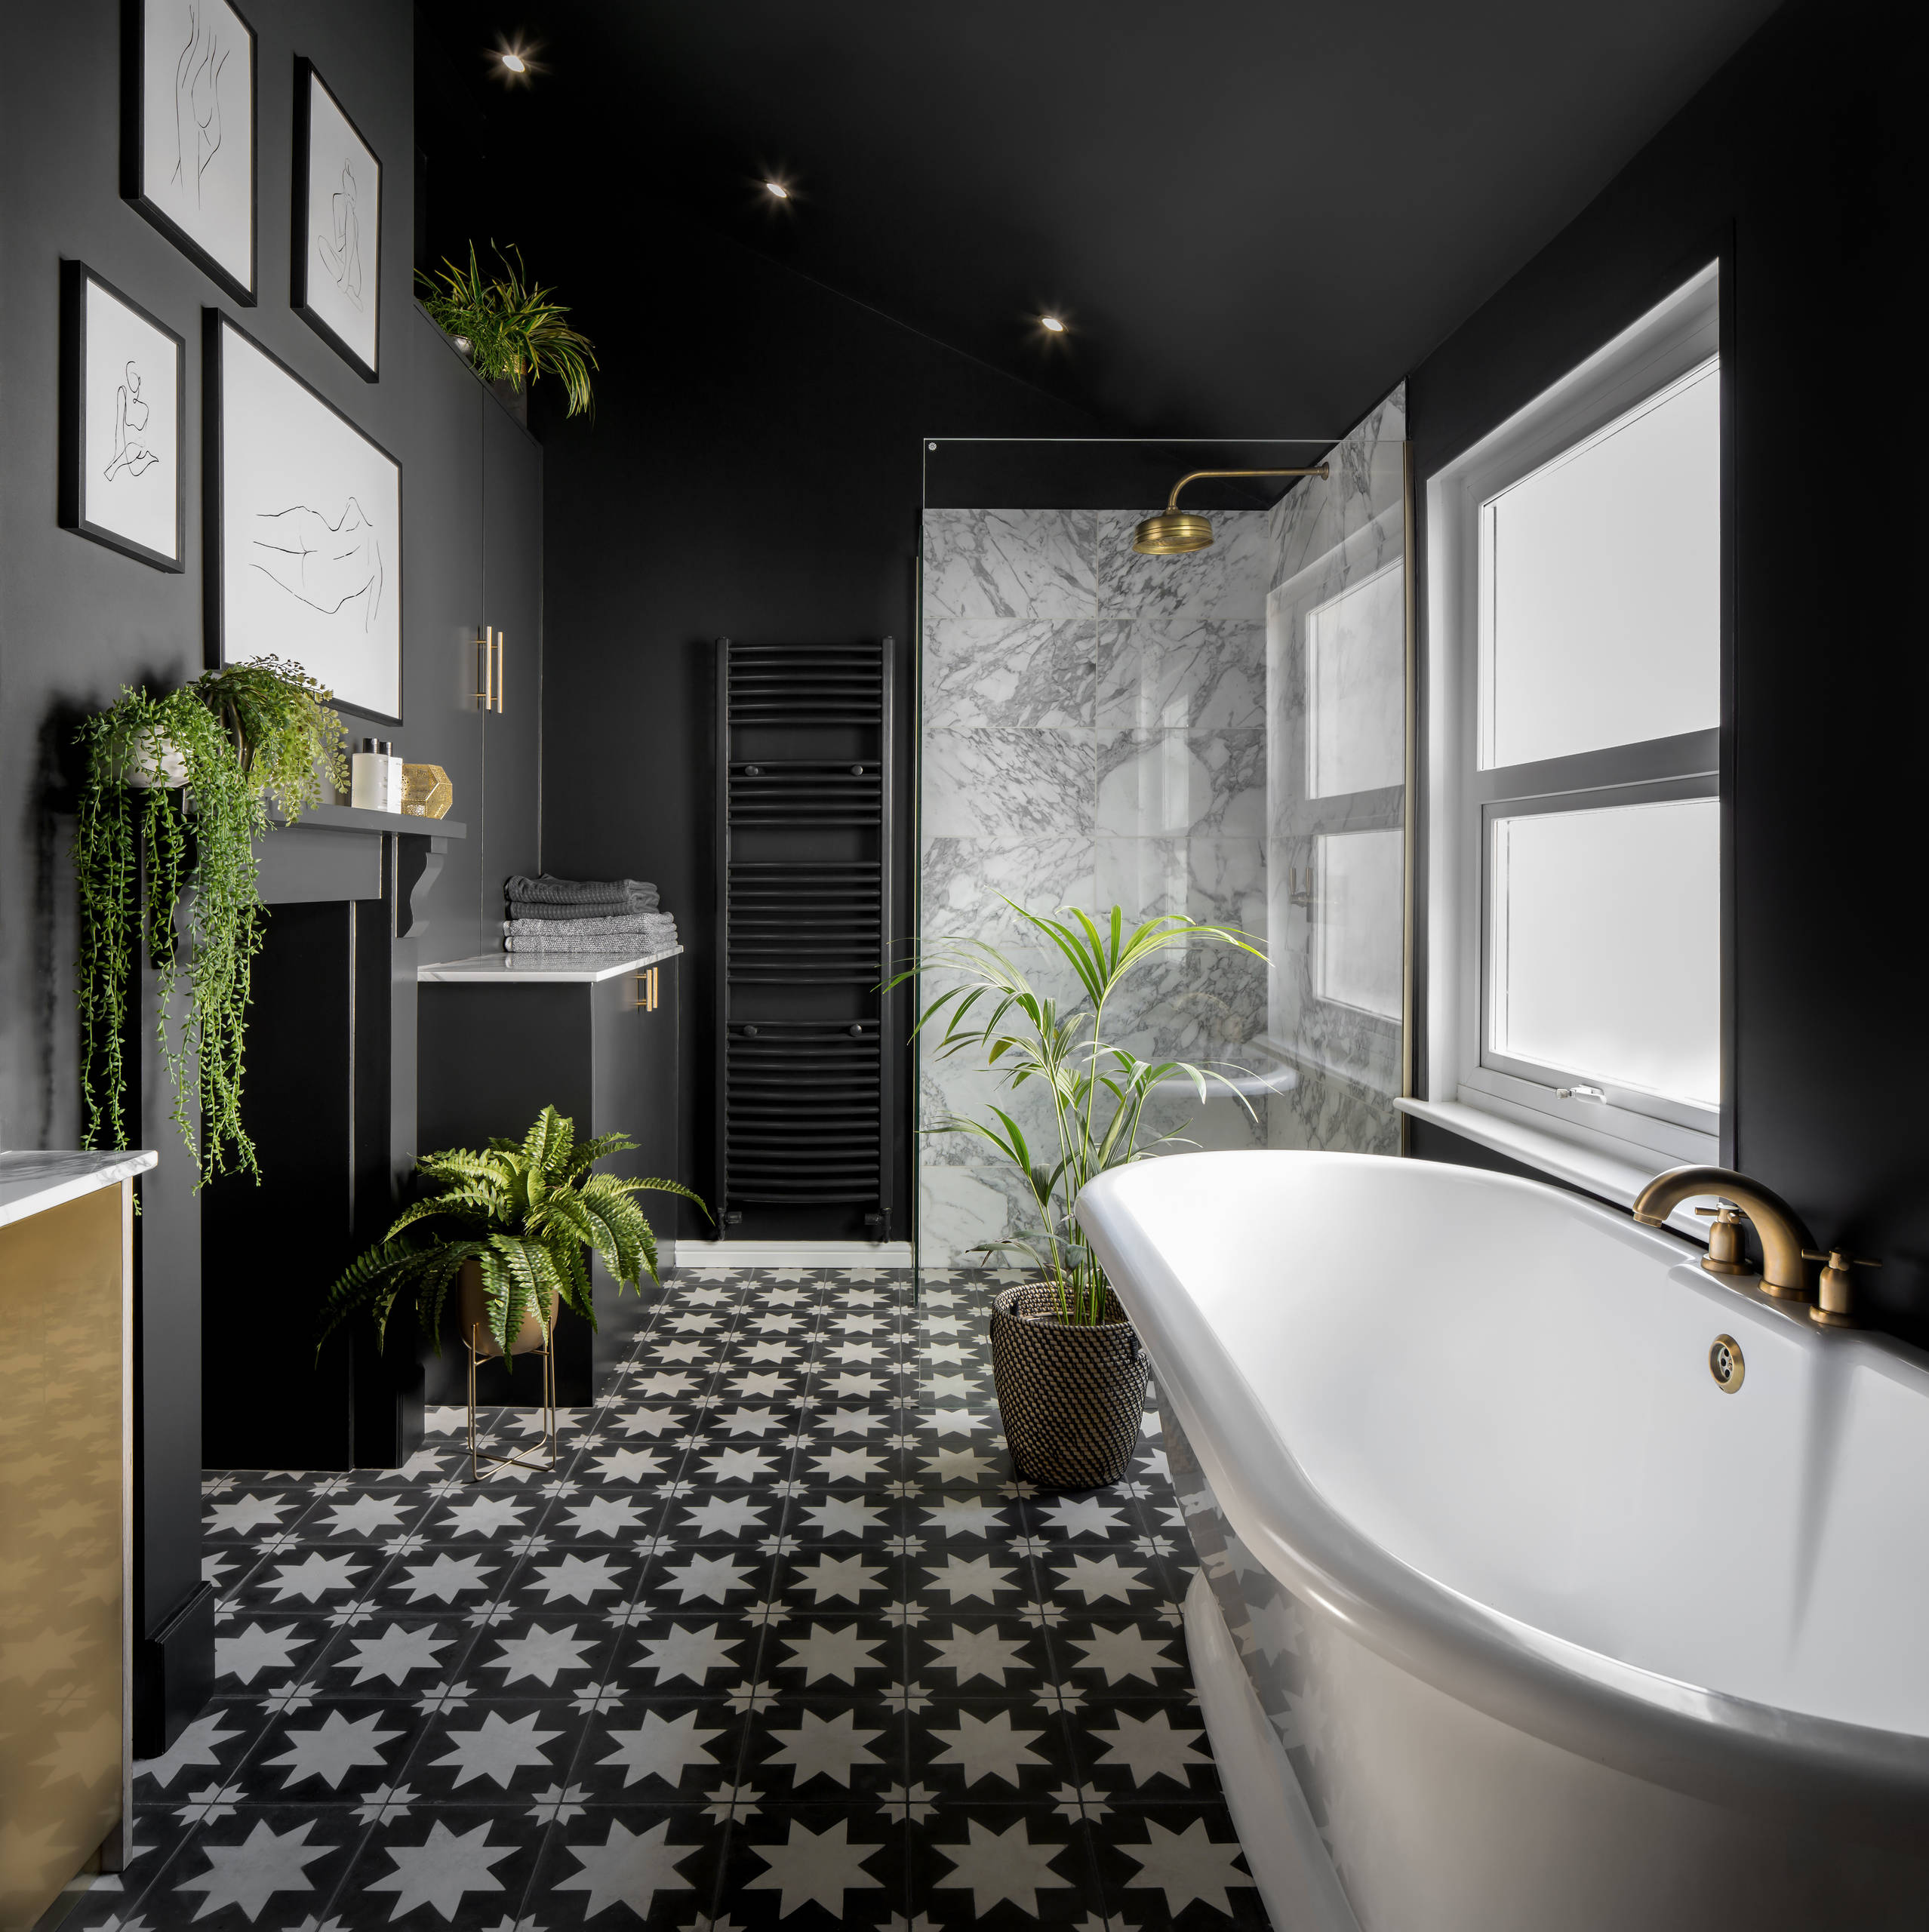 Cost Of Your Bathroom Renovation, How Much Does It Cost To Redo A Bathroom Uk